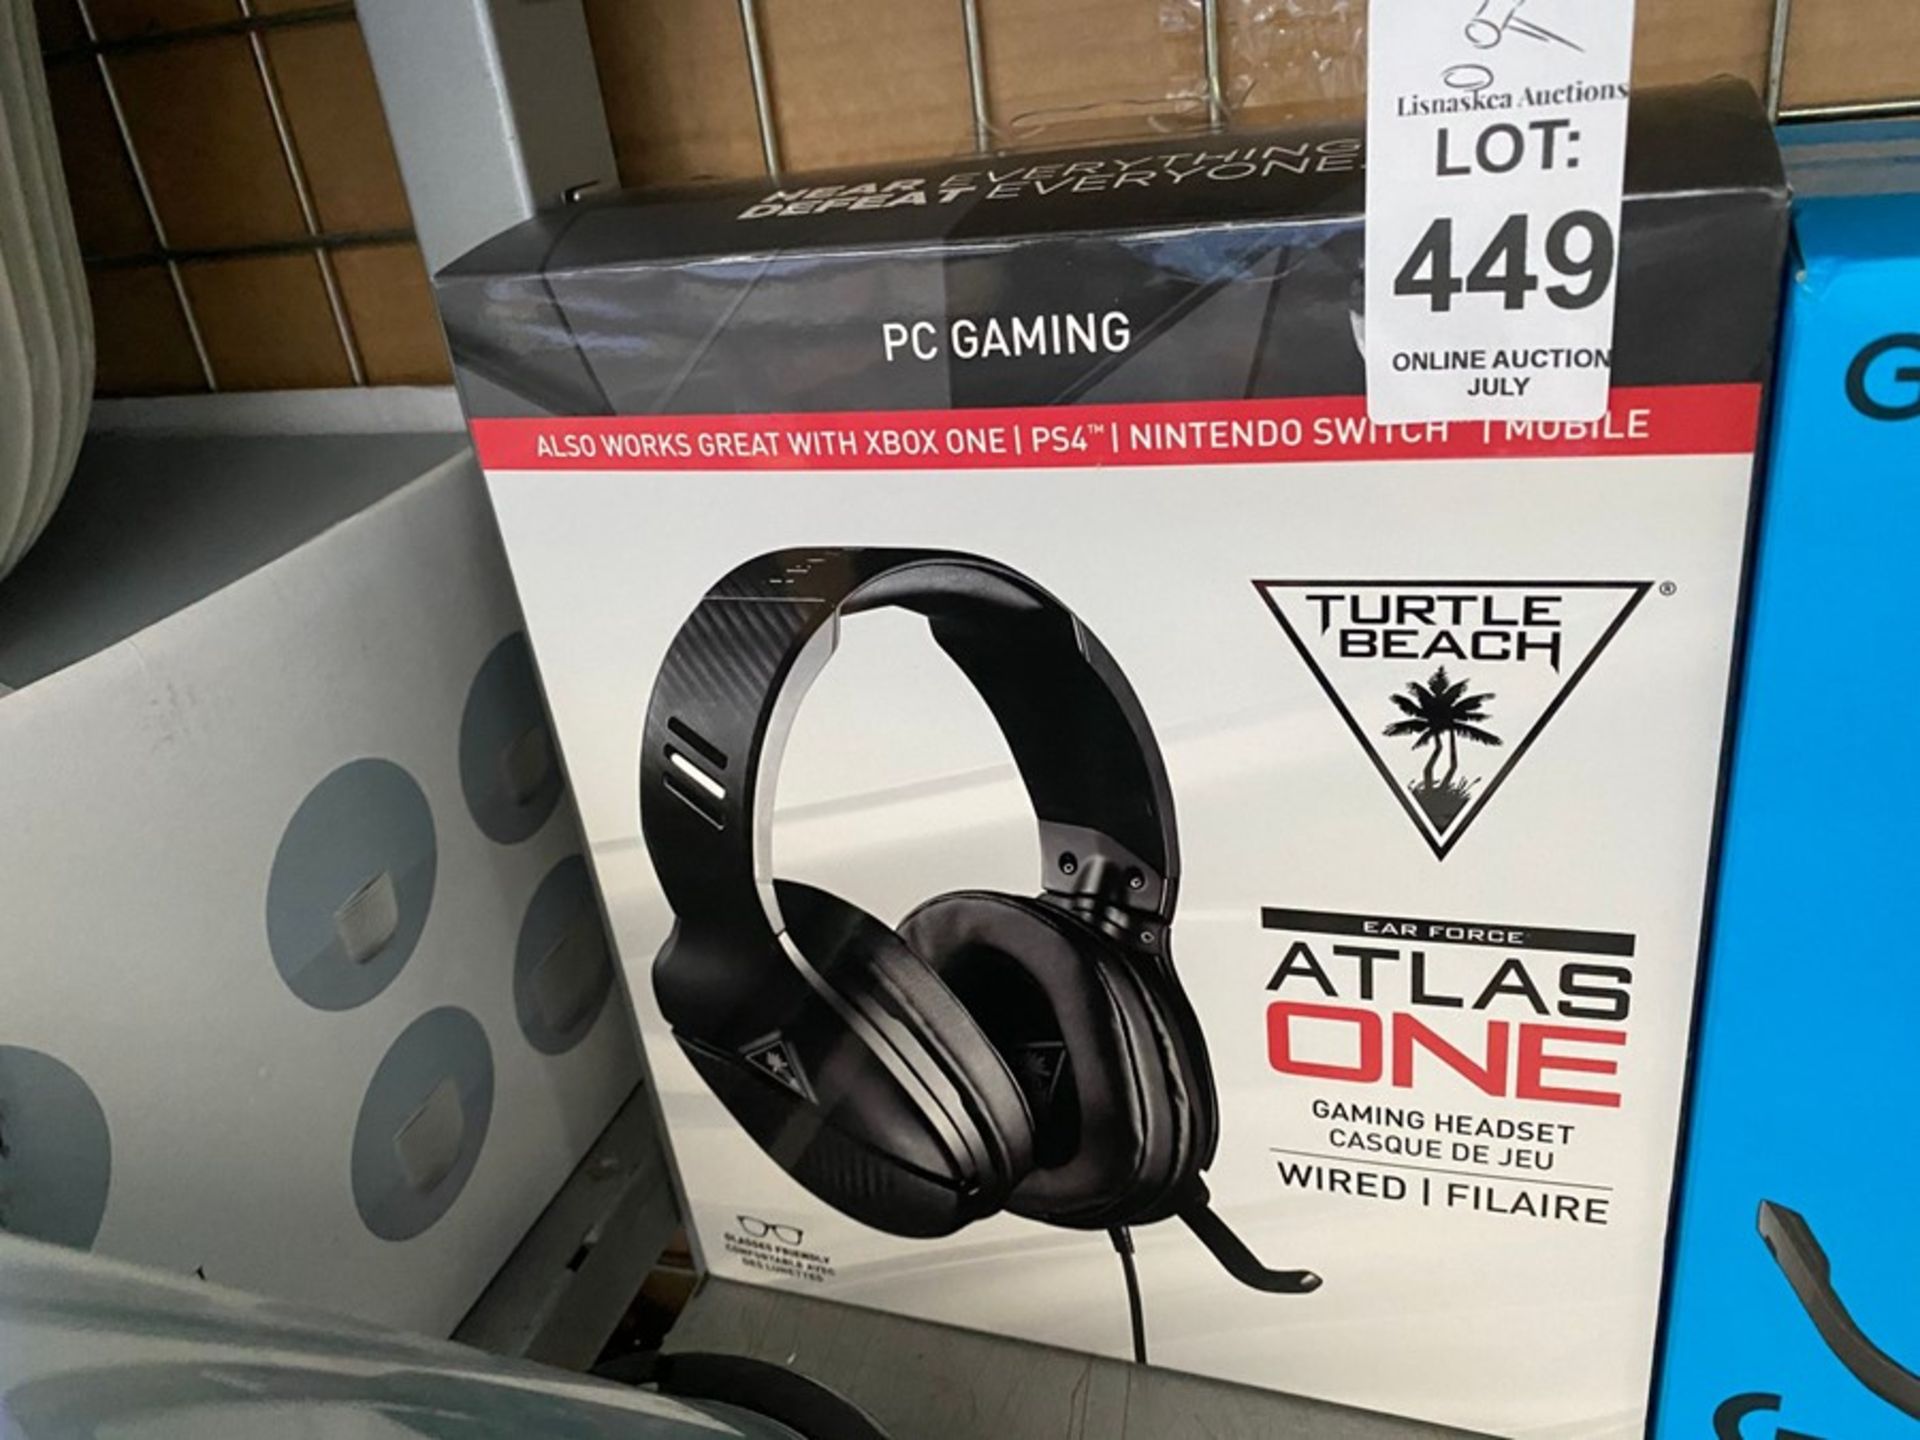 TURTLE BEACH ATLAS ONE GAMING HEADSET FOR PC